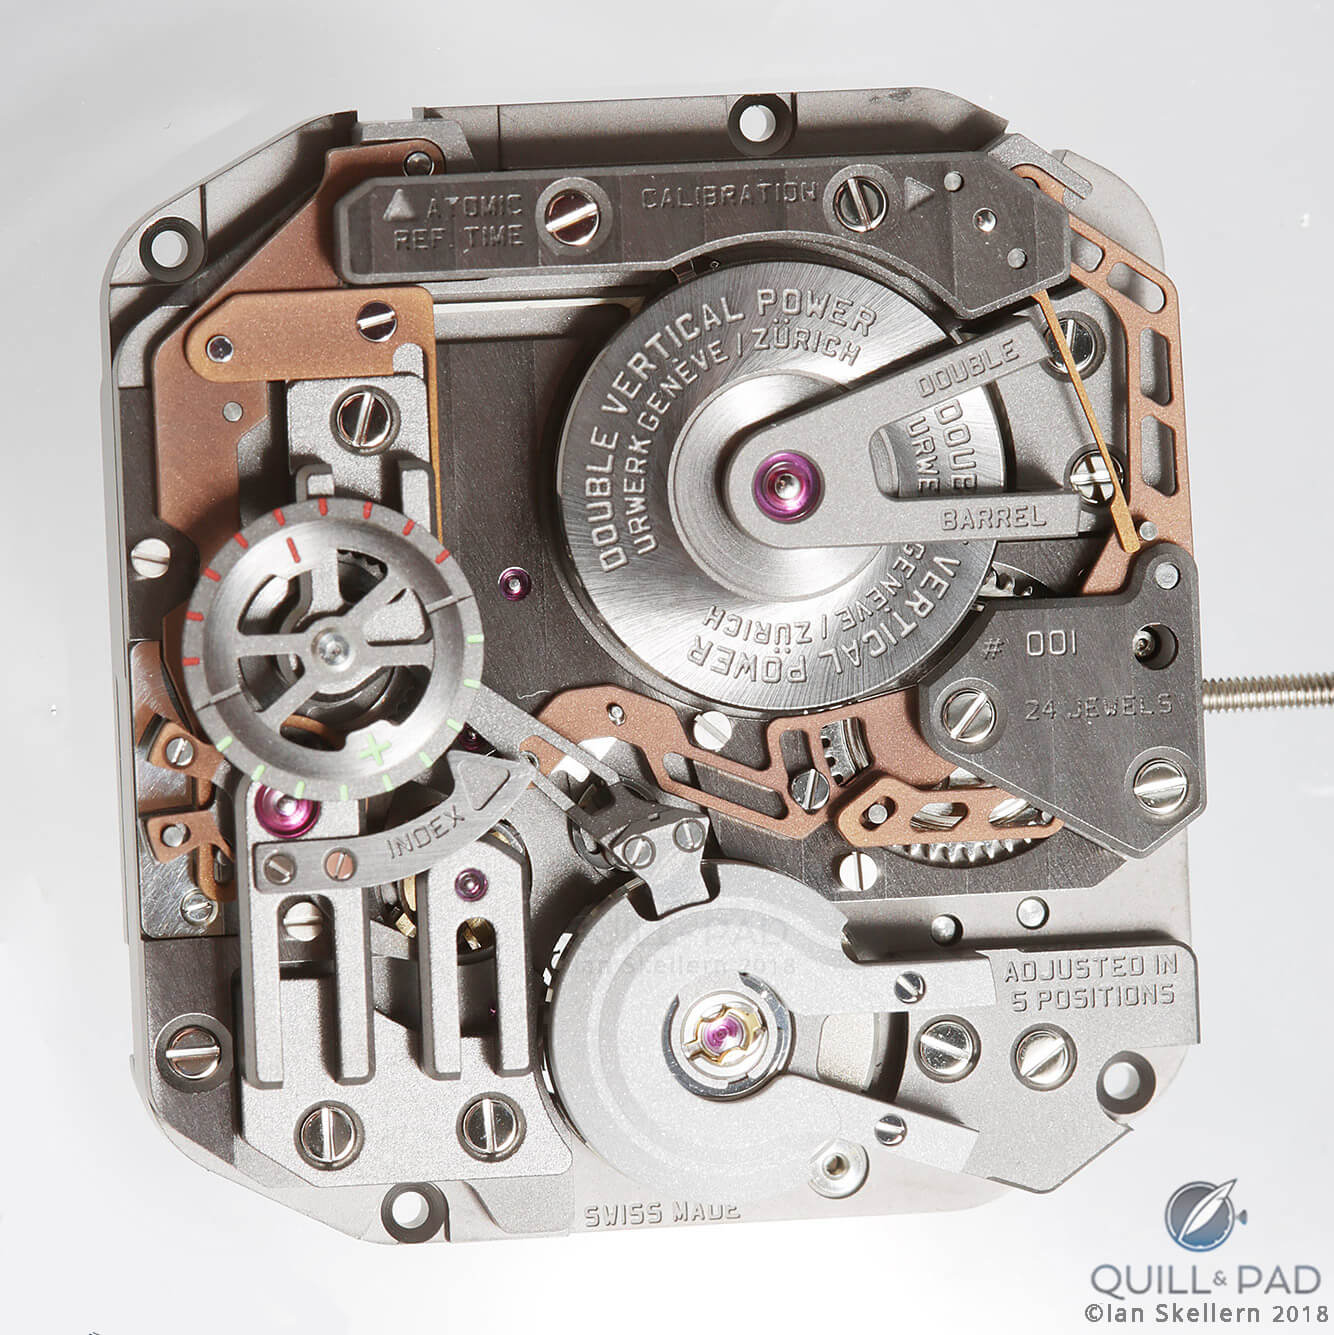 Urwerk AMC (Atomic Mechanical Control) wristwatch slave movement.The tan-color components are those that communicate with the atomic master clock